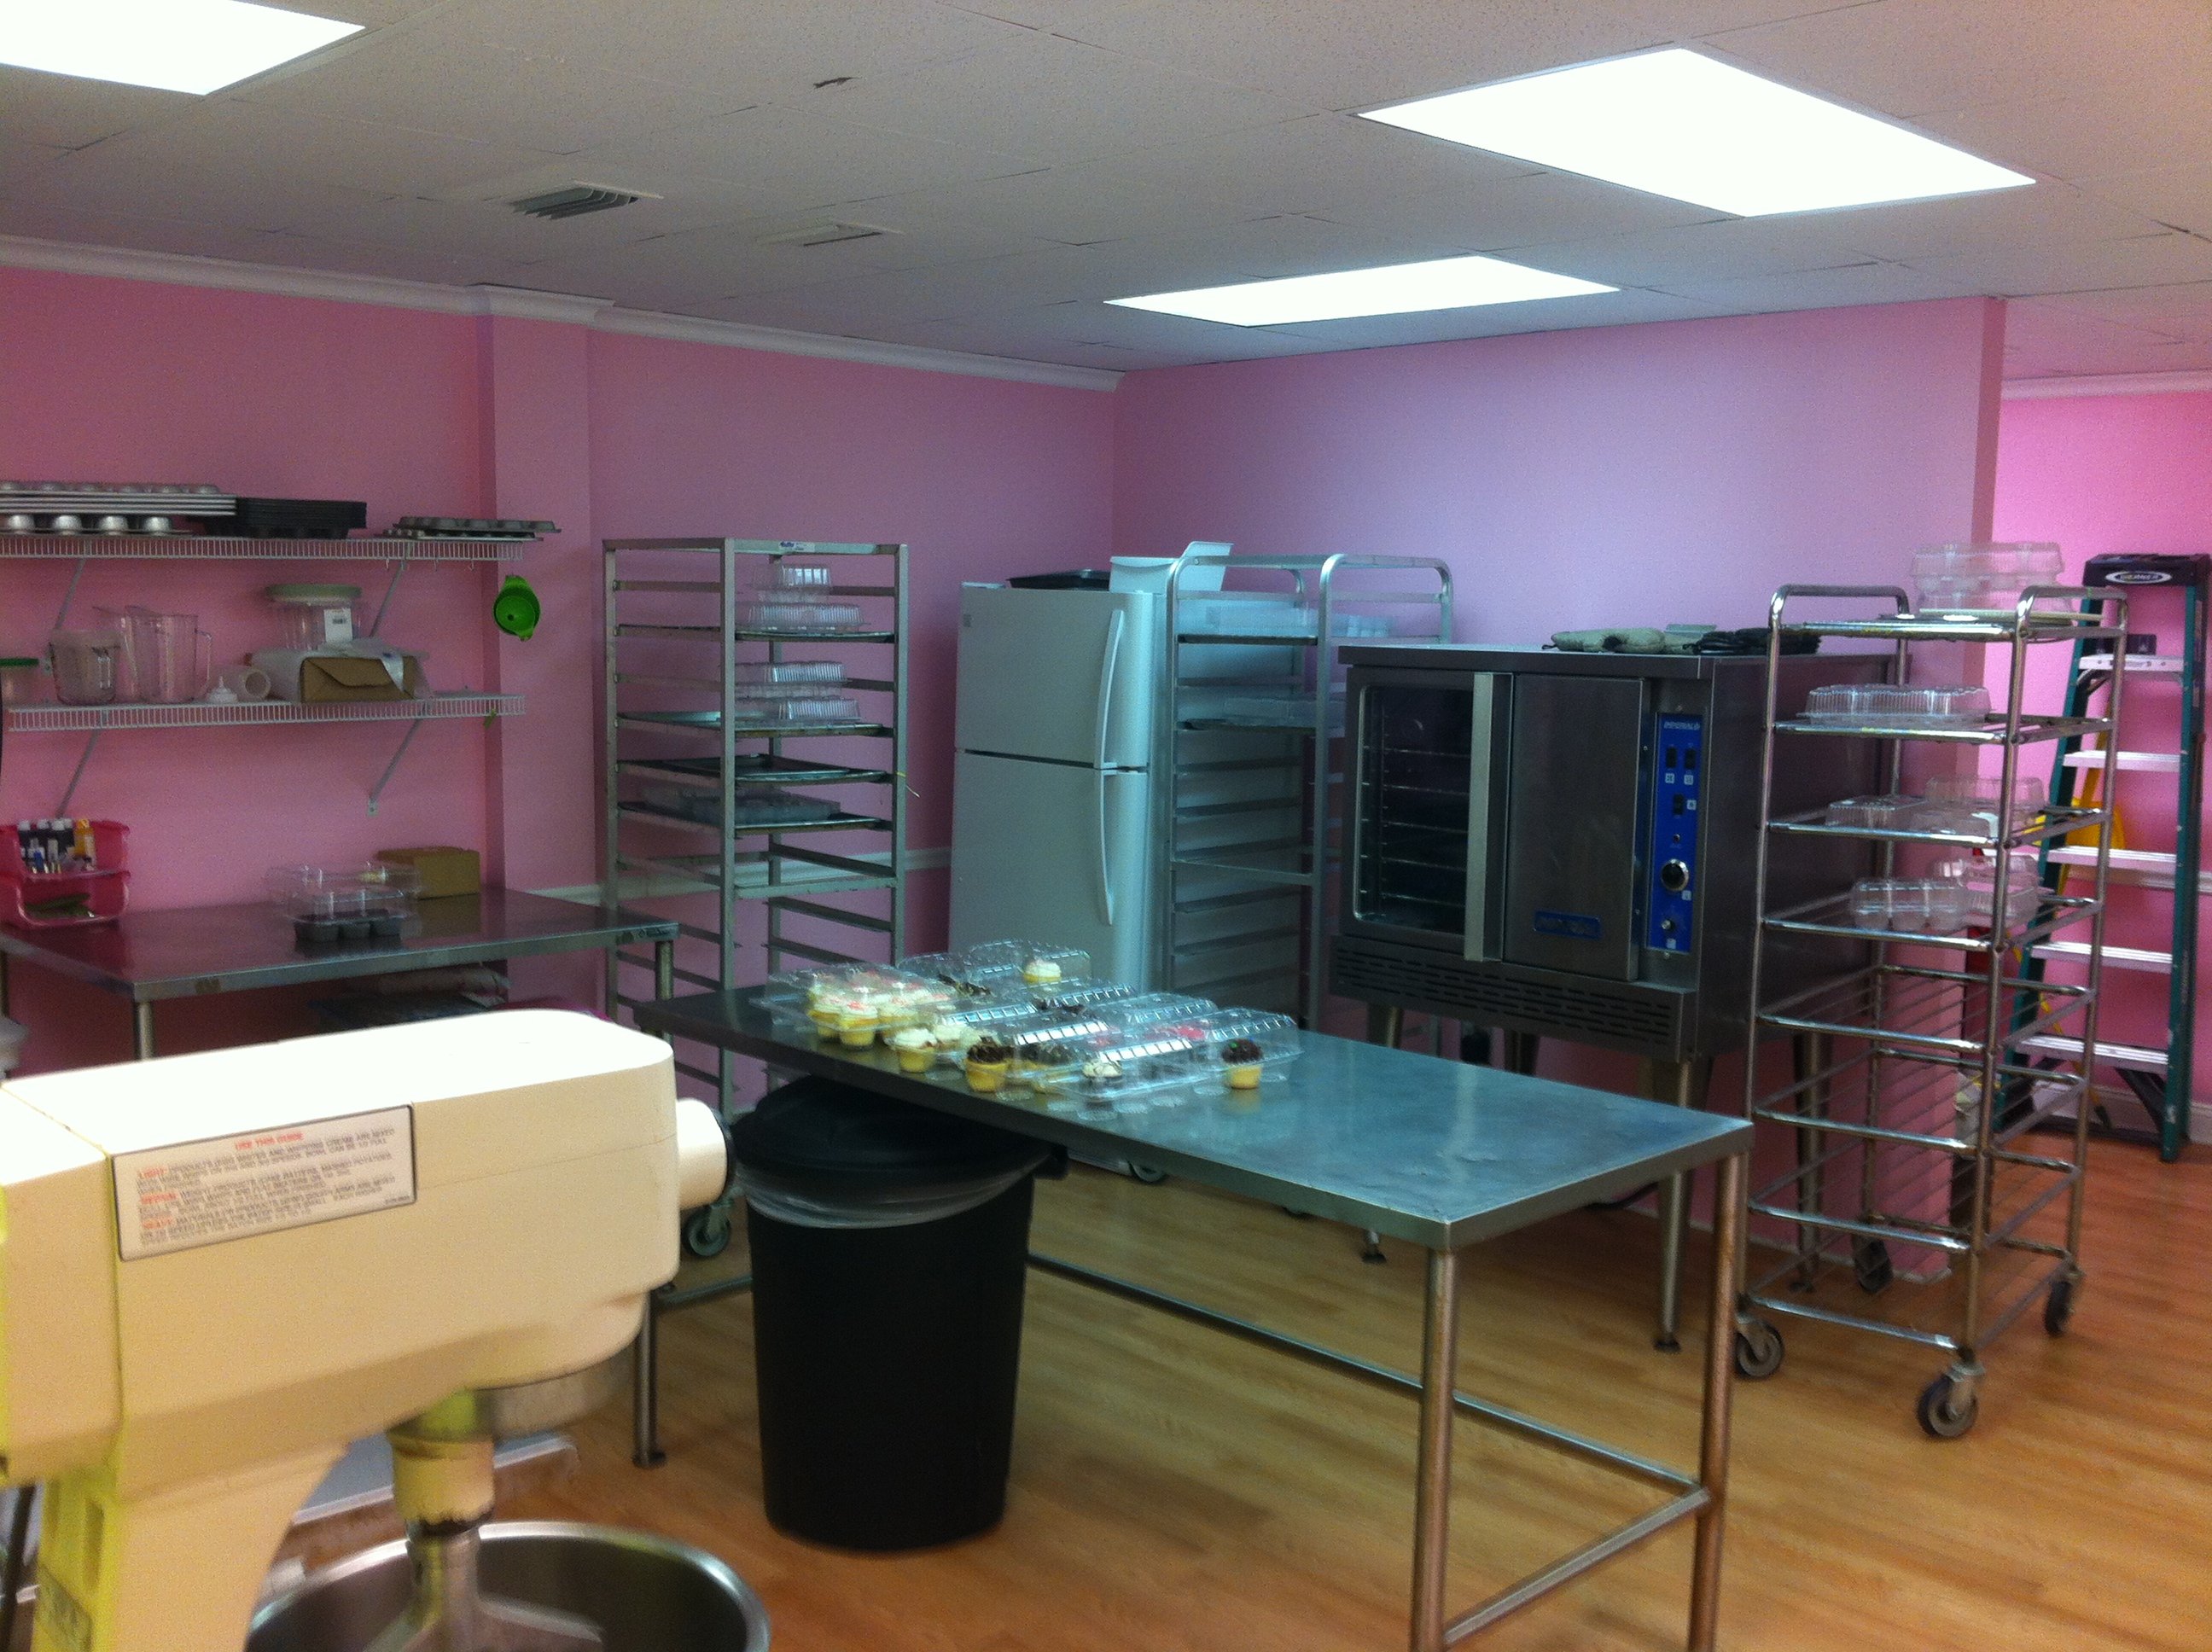 Unforgettable Cupcake Shop and Food Truck For Sale